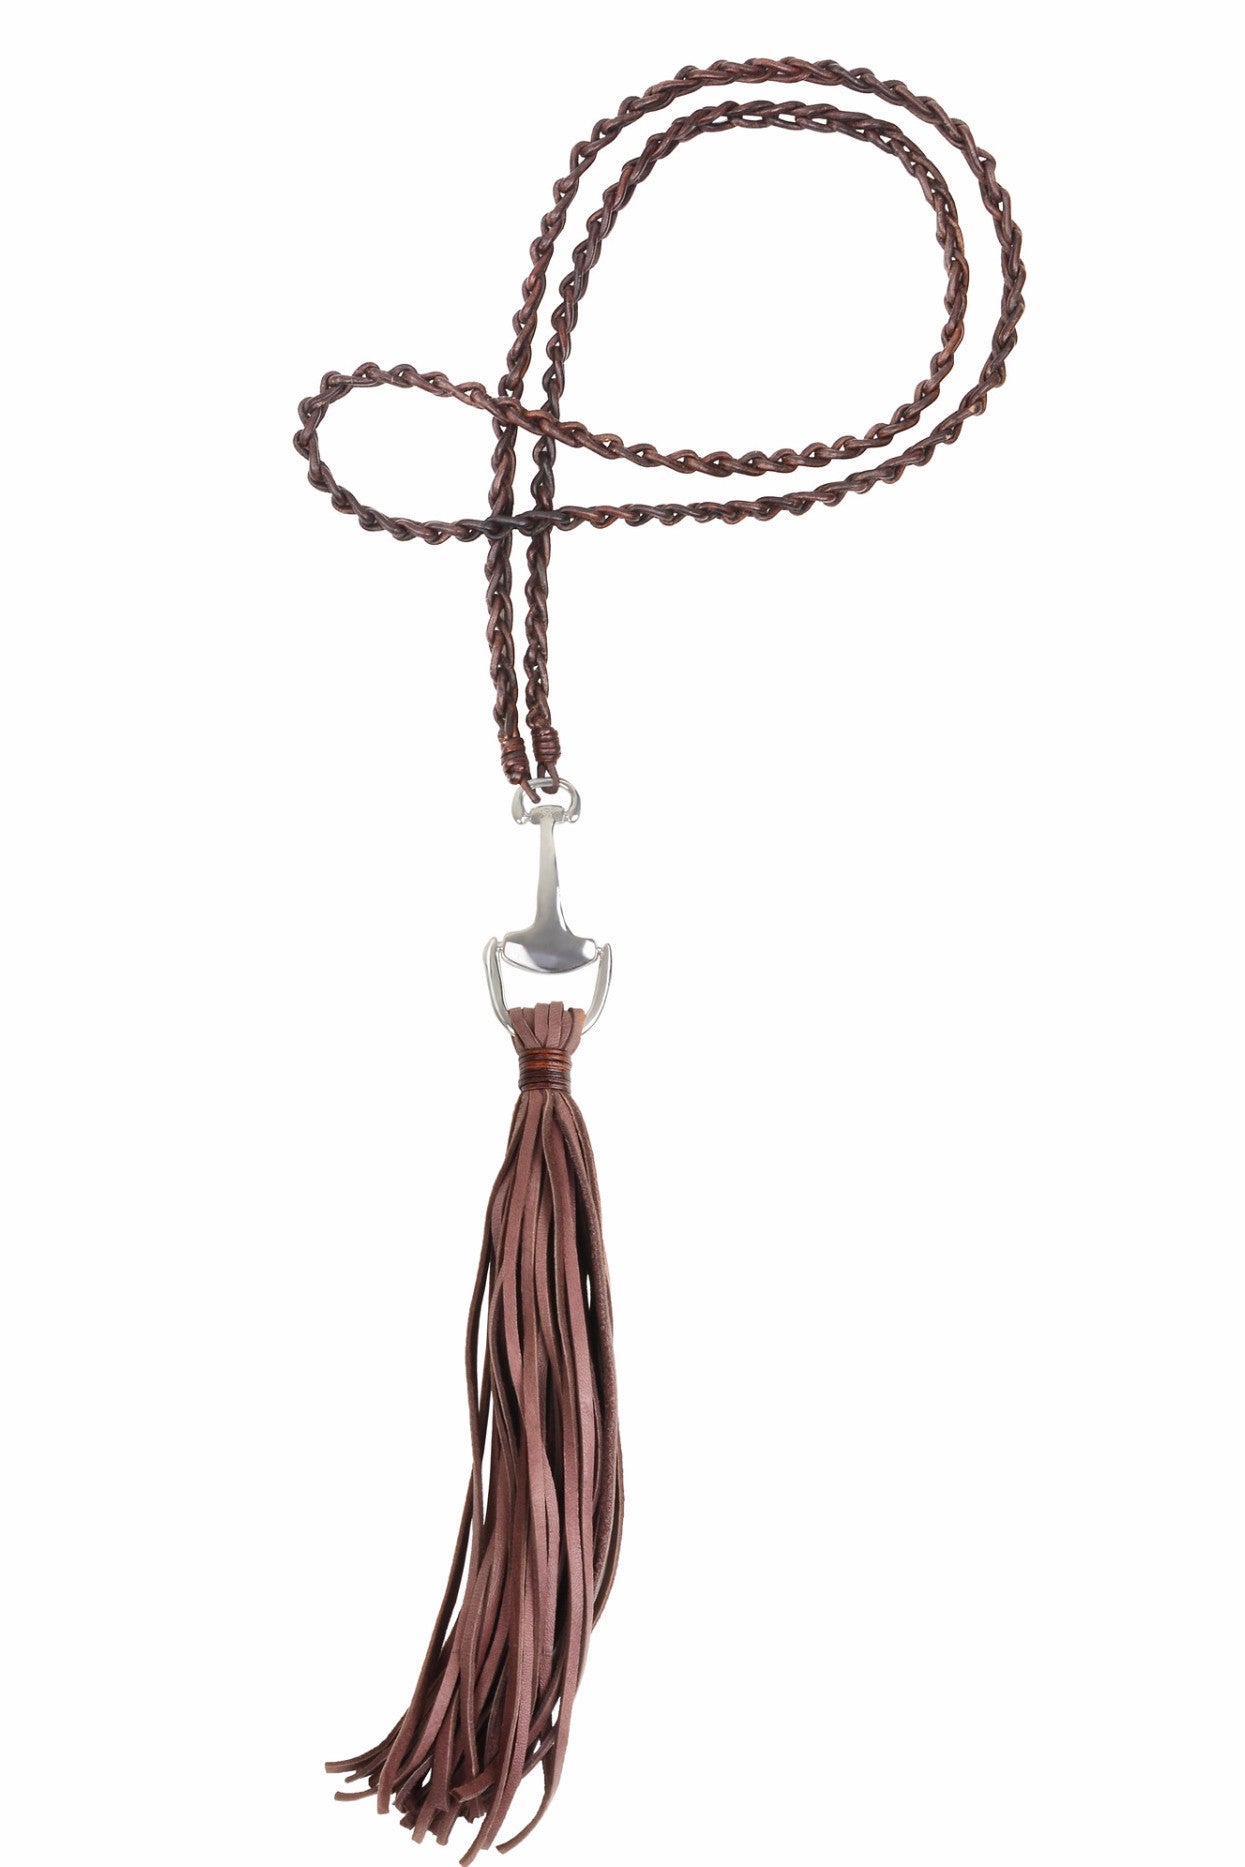 Equestrian Fringe Necklace - Hottest Designer Pearl and Leather Jewelry | VINCENT PEACH
